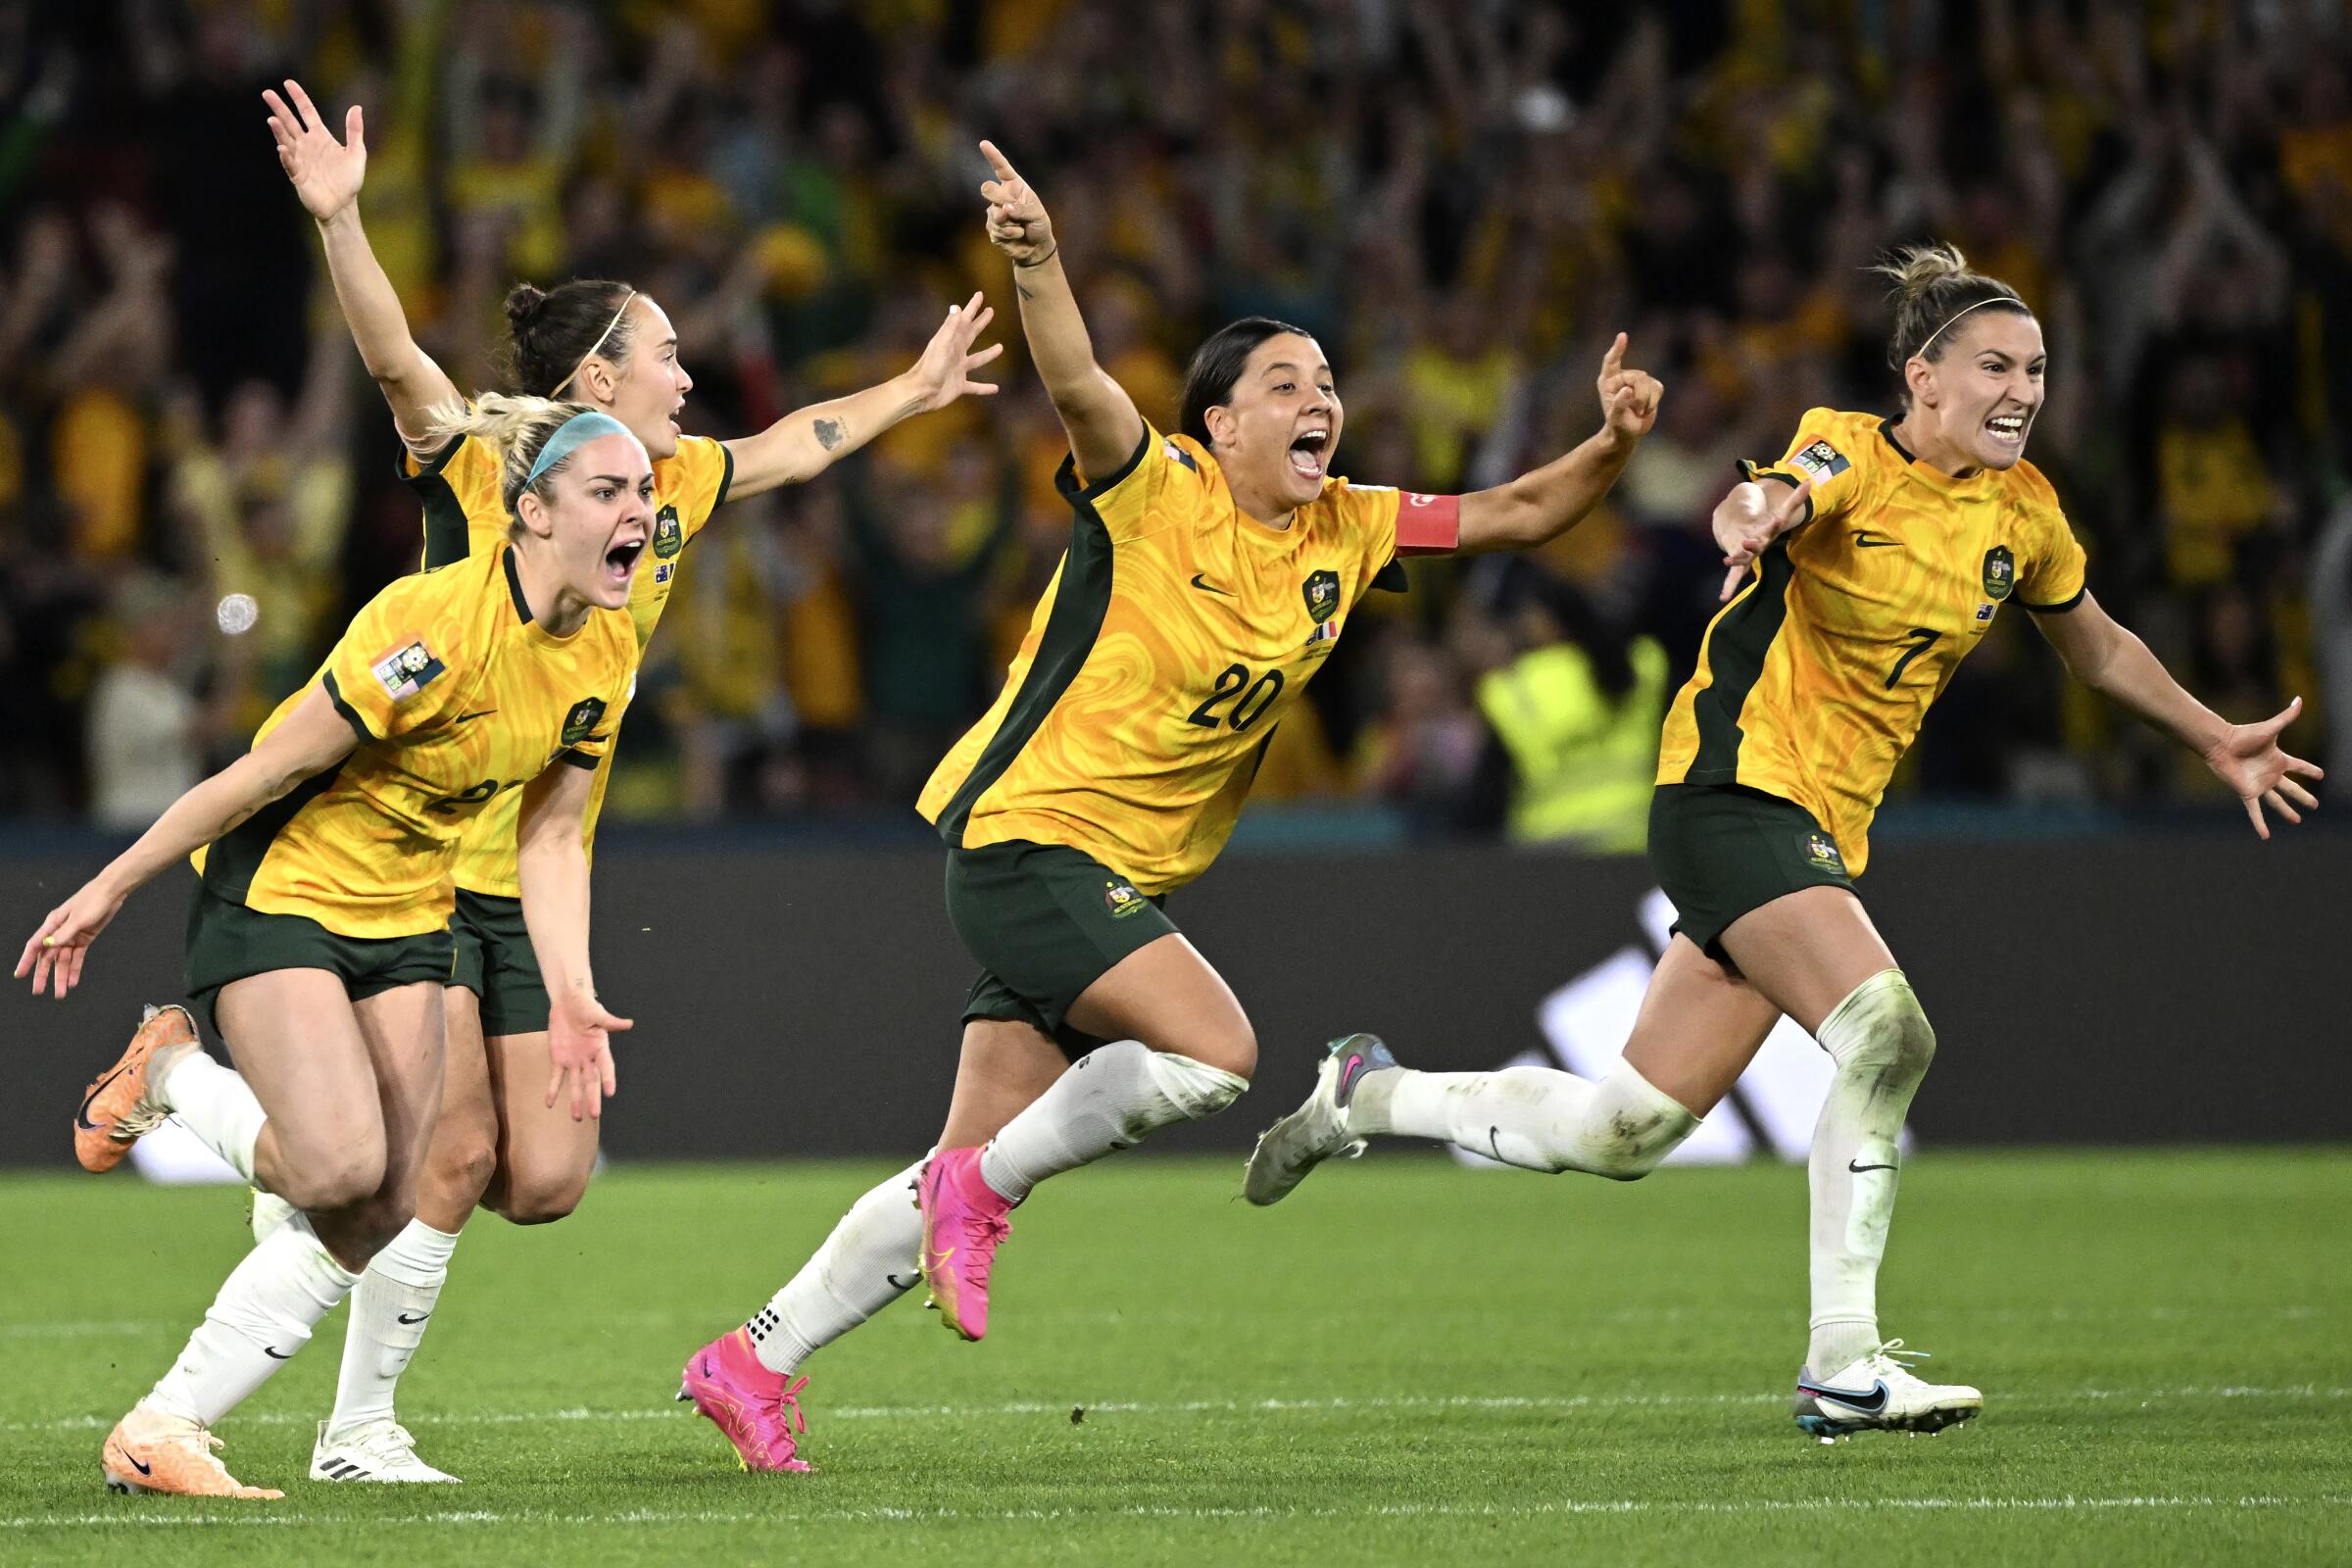 Four Australian women's soccer players celebrate after defeating France